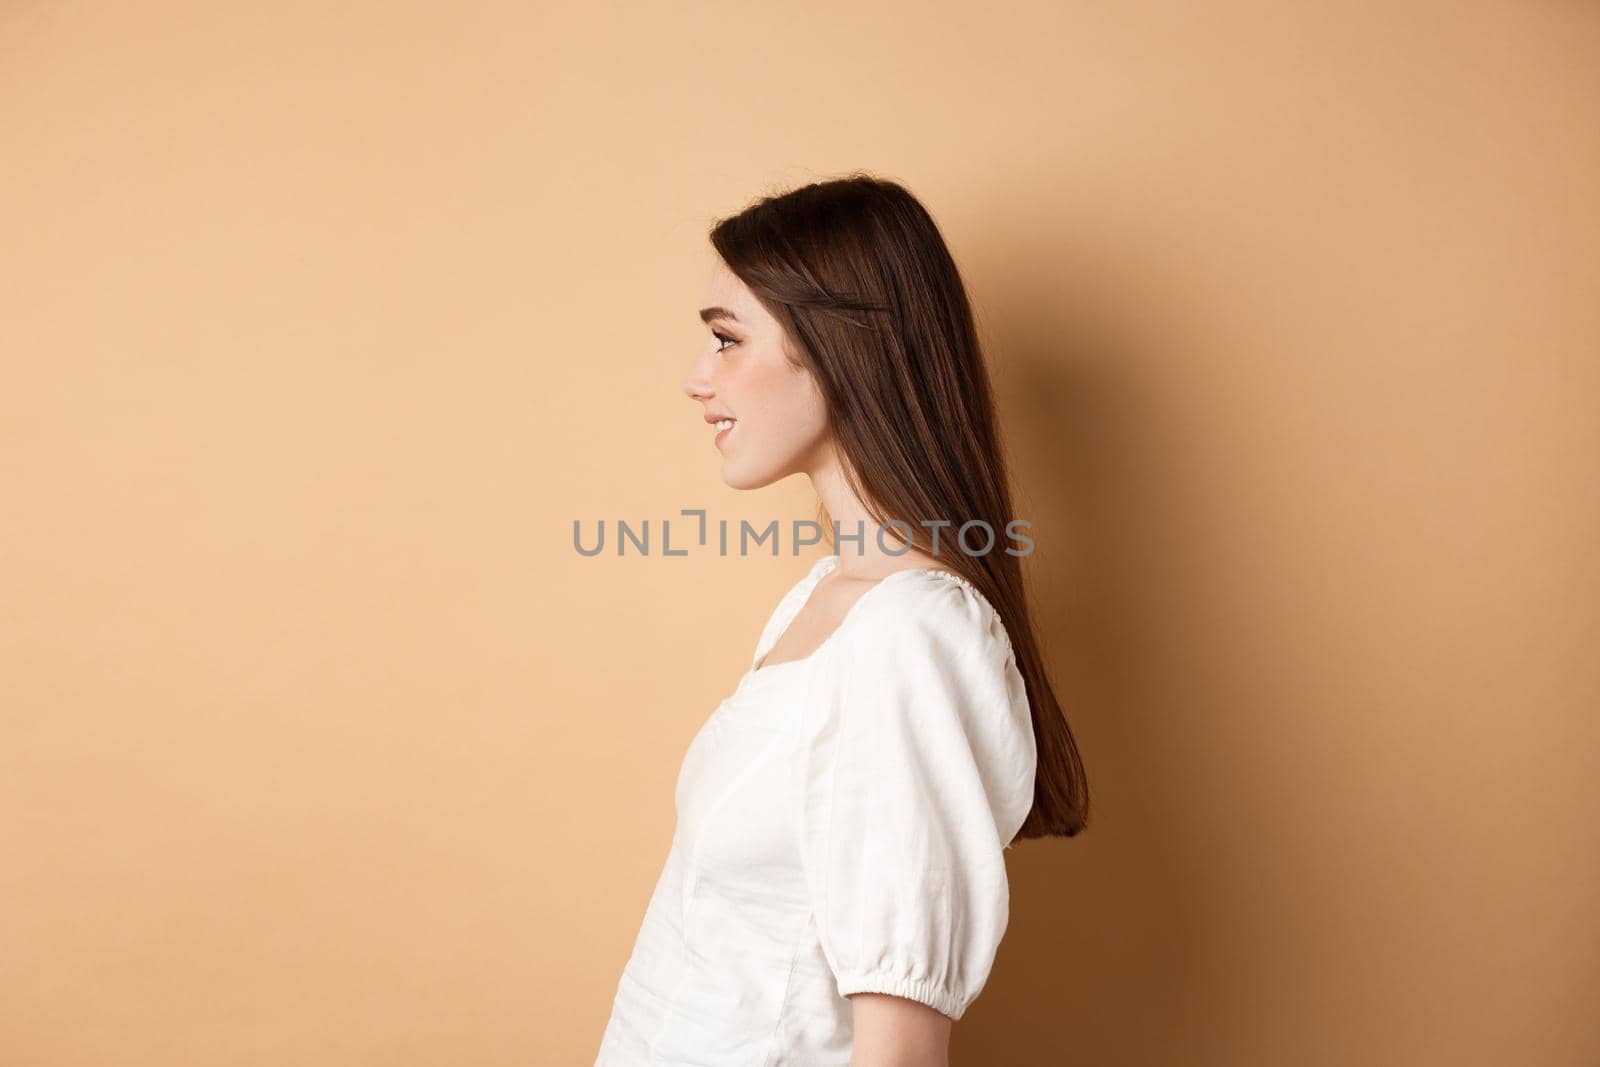 Profile of beautiful caucasian woman with long natural hair, looking left at empty space and smiling romantic, standing on beige background.